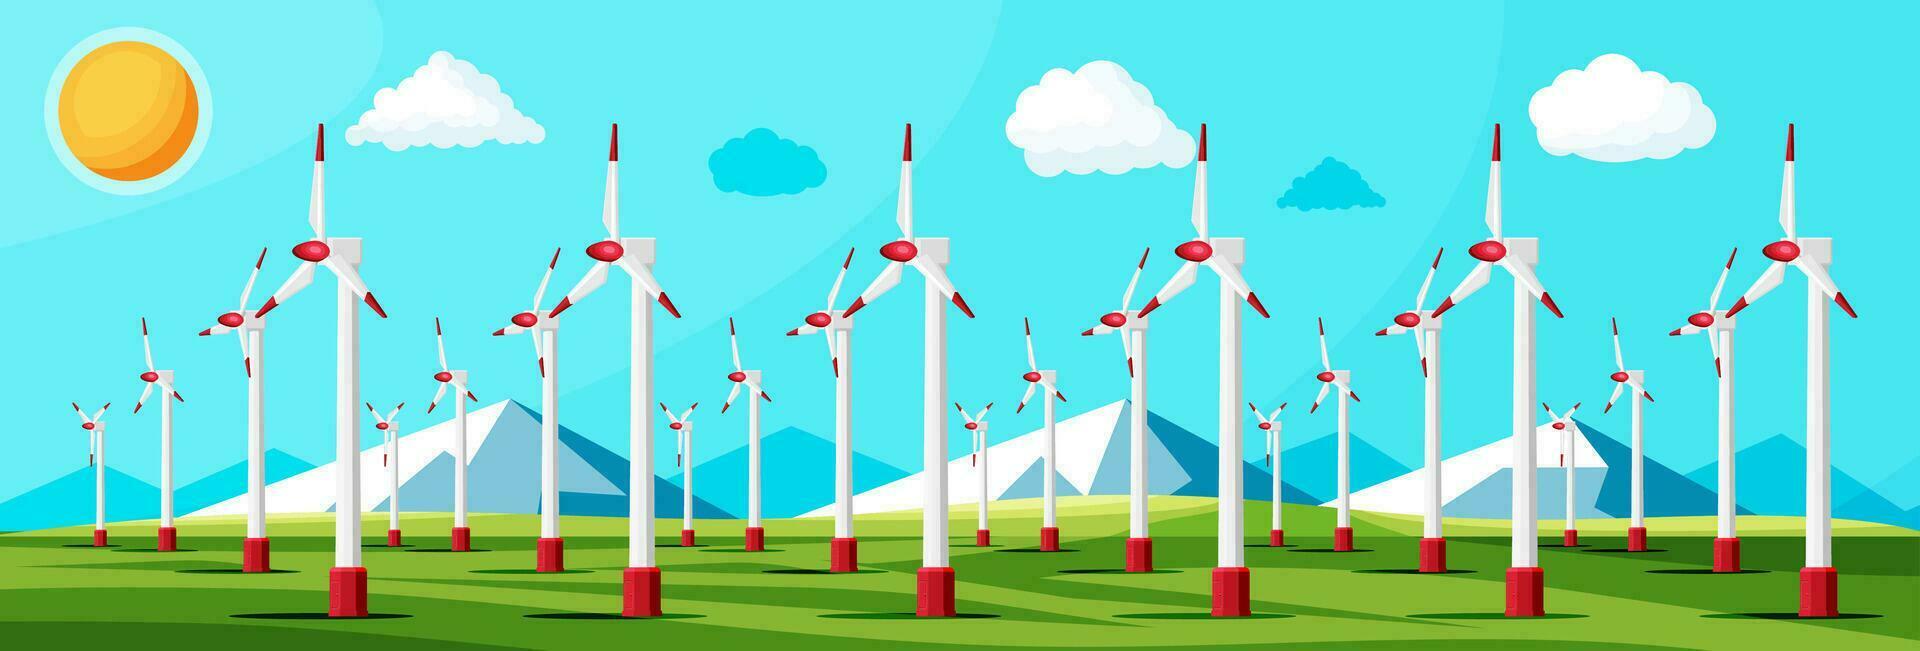 Wind Farm In Green Fields Among Mountains. Nature Landscape With Modern Windmills. Green Energy Concept Banner. Ecology Alternative Energy Source Technology. Flat Vector Illustration